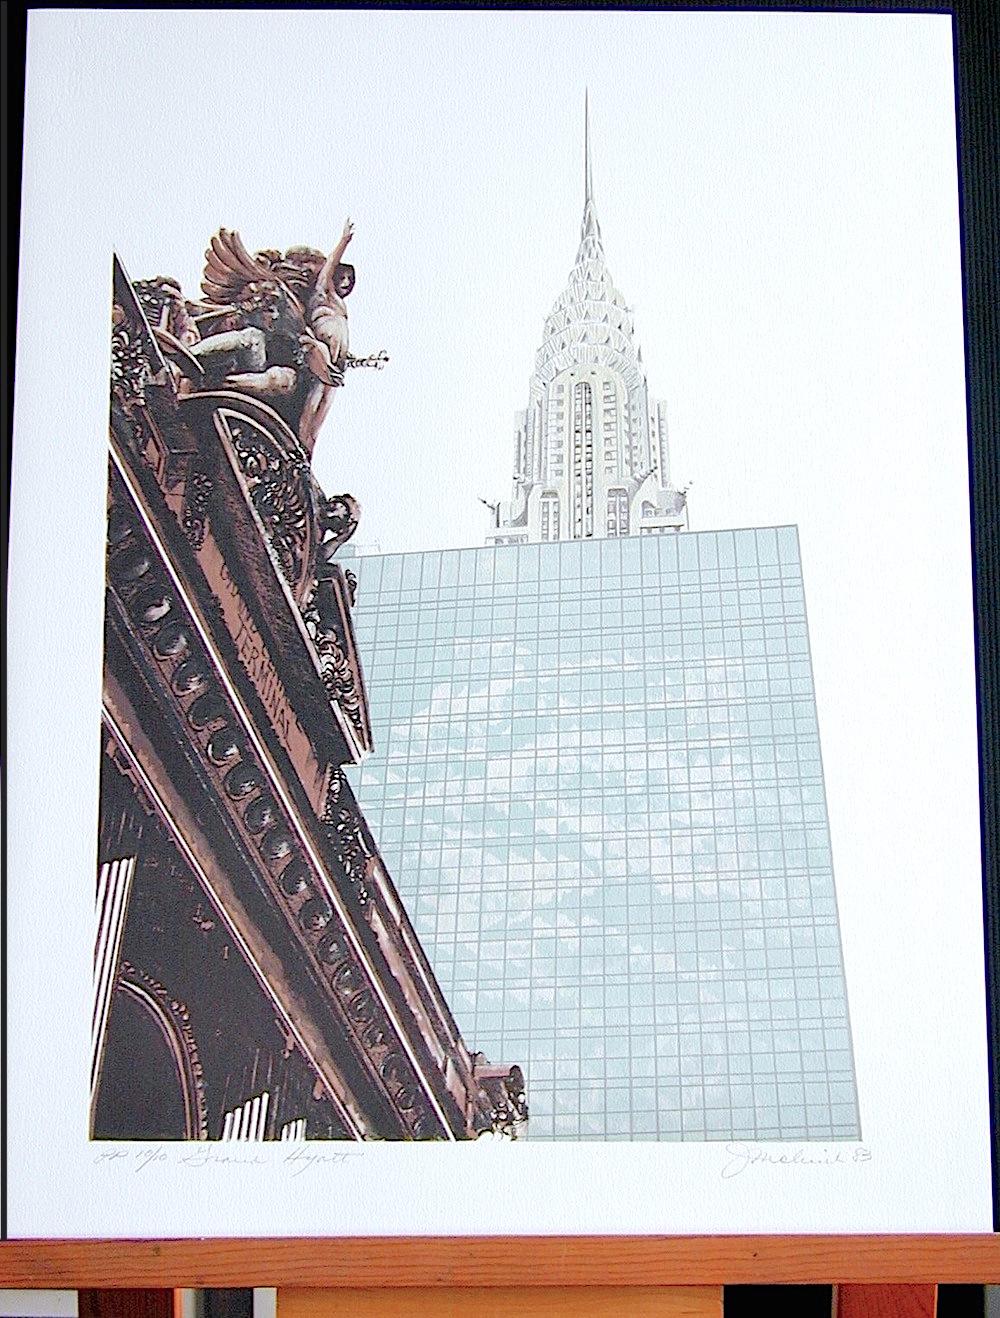 NEW YORK CITY: GRAND HYATT Signed Lithograph NYC Building Grand Central Terminal - Contemporary Print by Joan Melnick